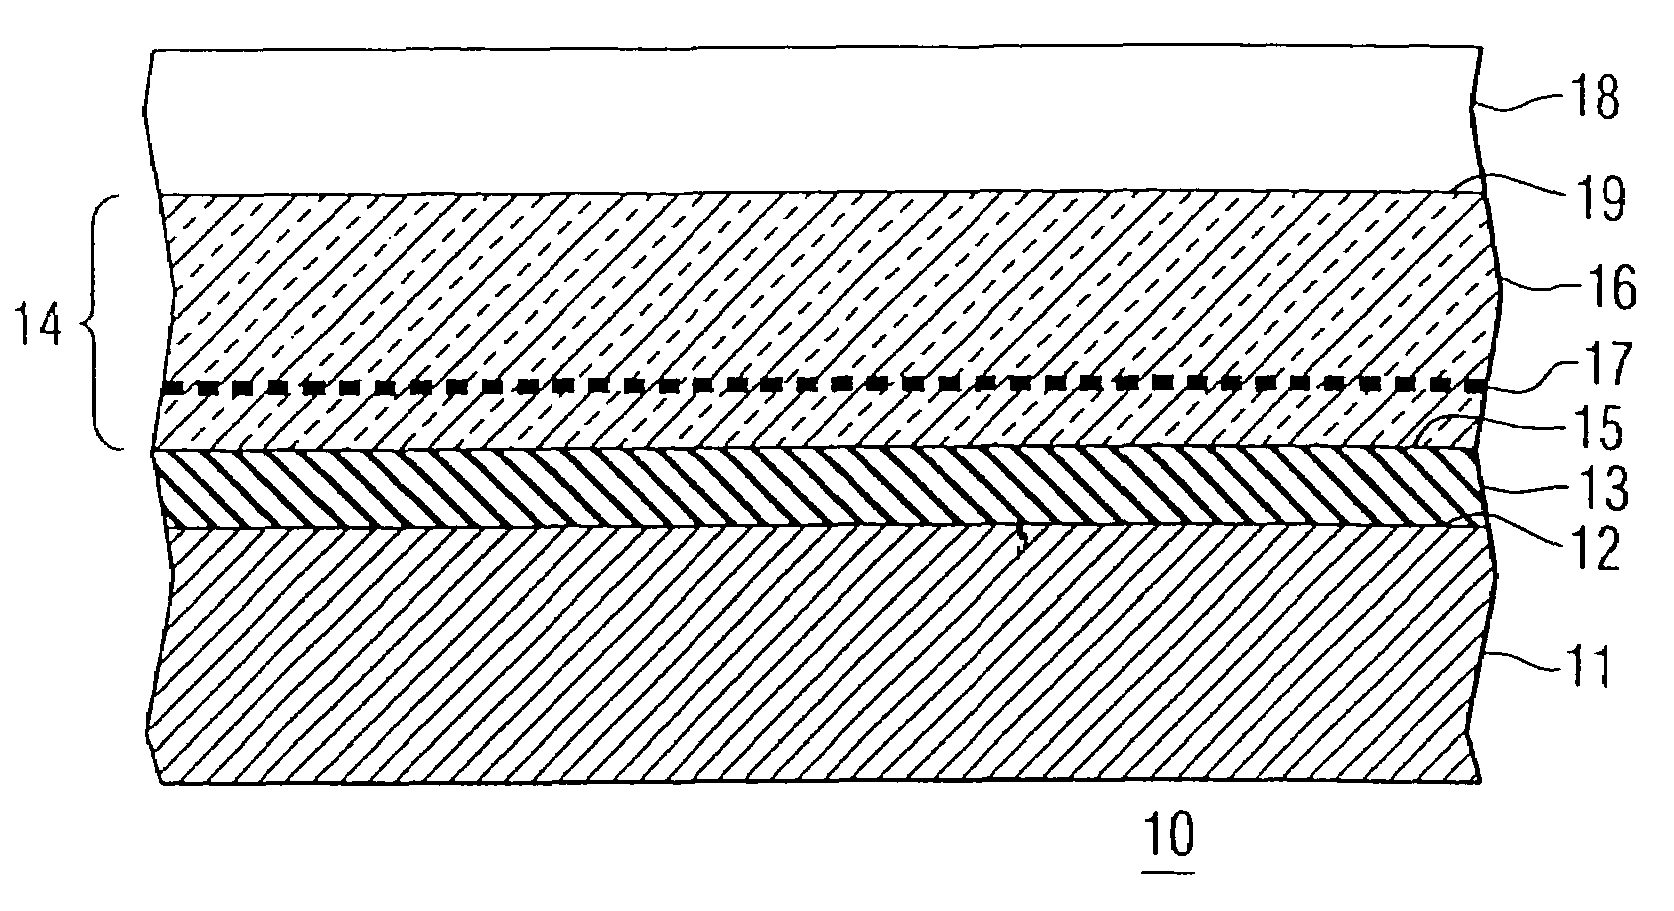 Bonded substrate for an integrated circuit containing a planar intrinsic gettering zone